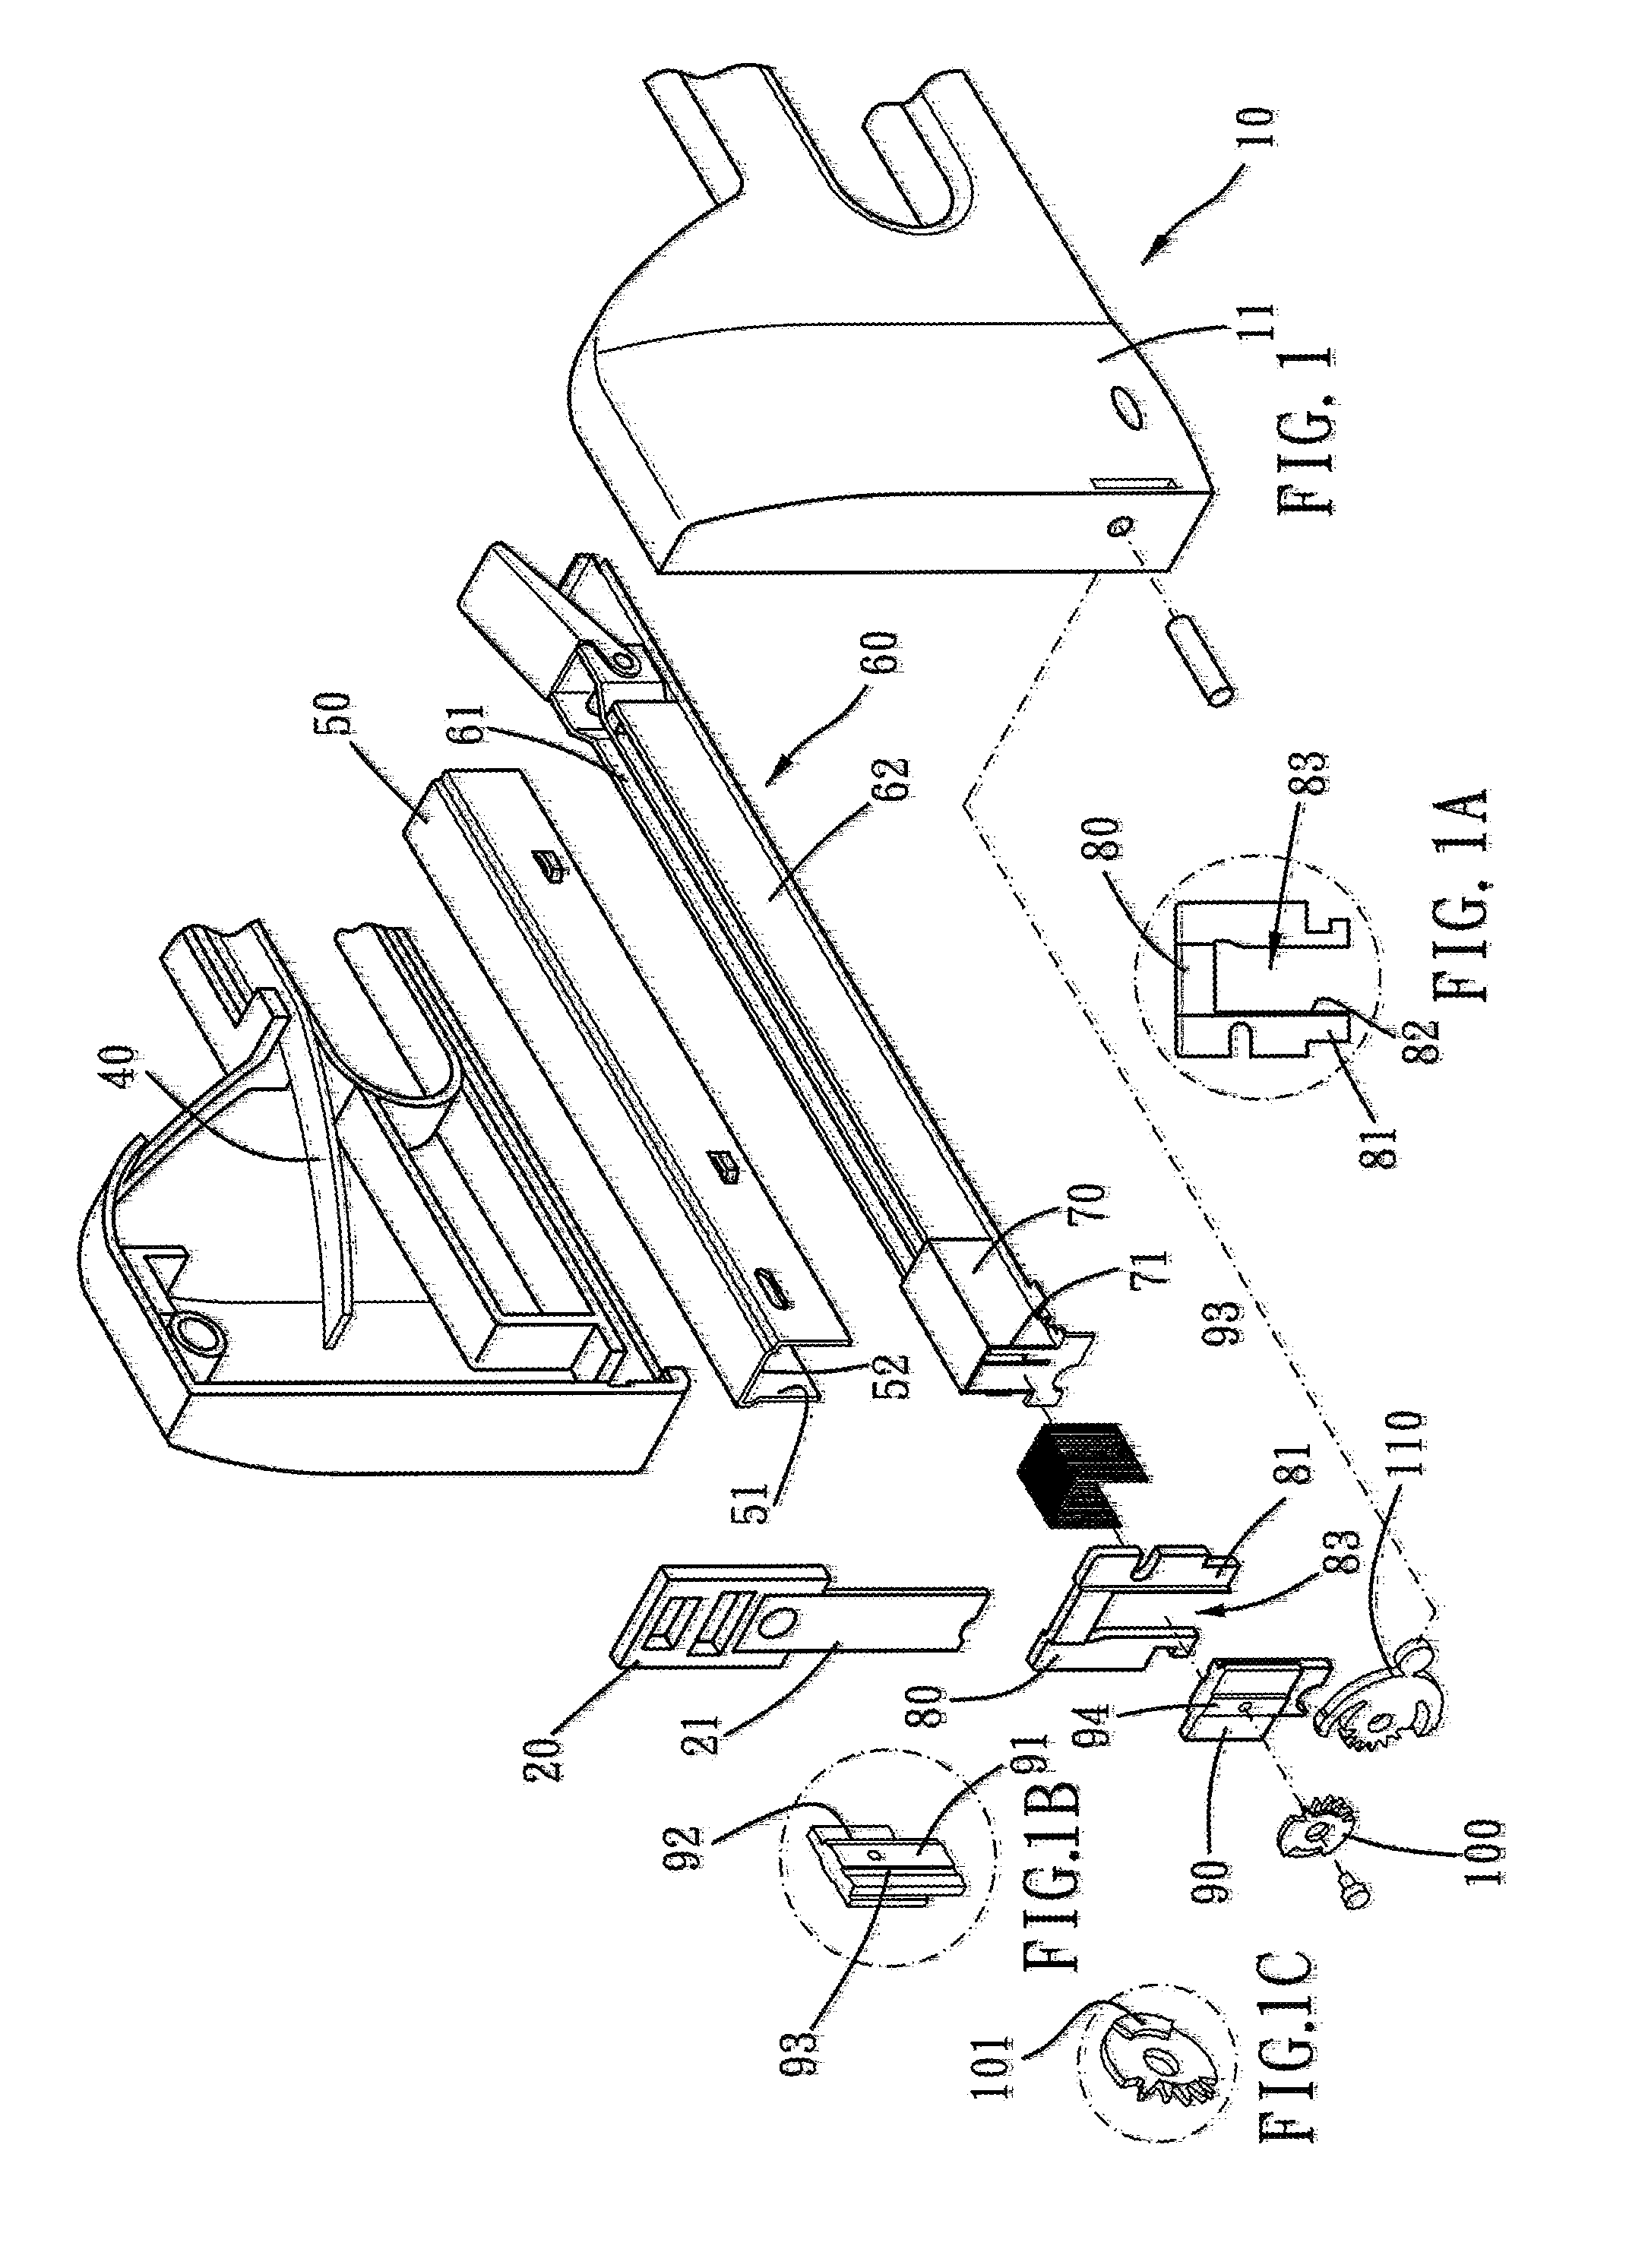 Nailing device adapted for nail units of different sizes